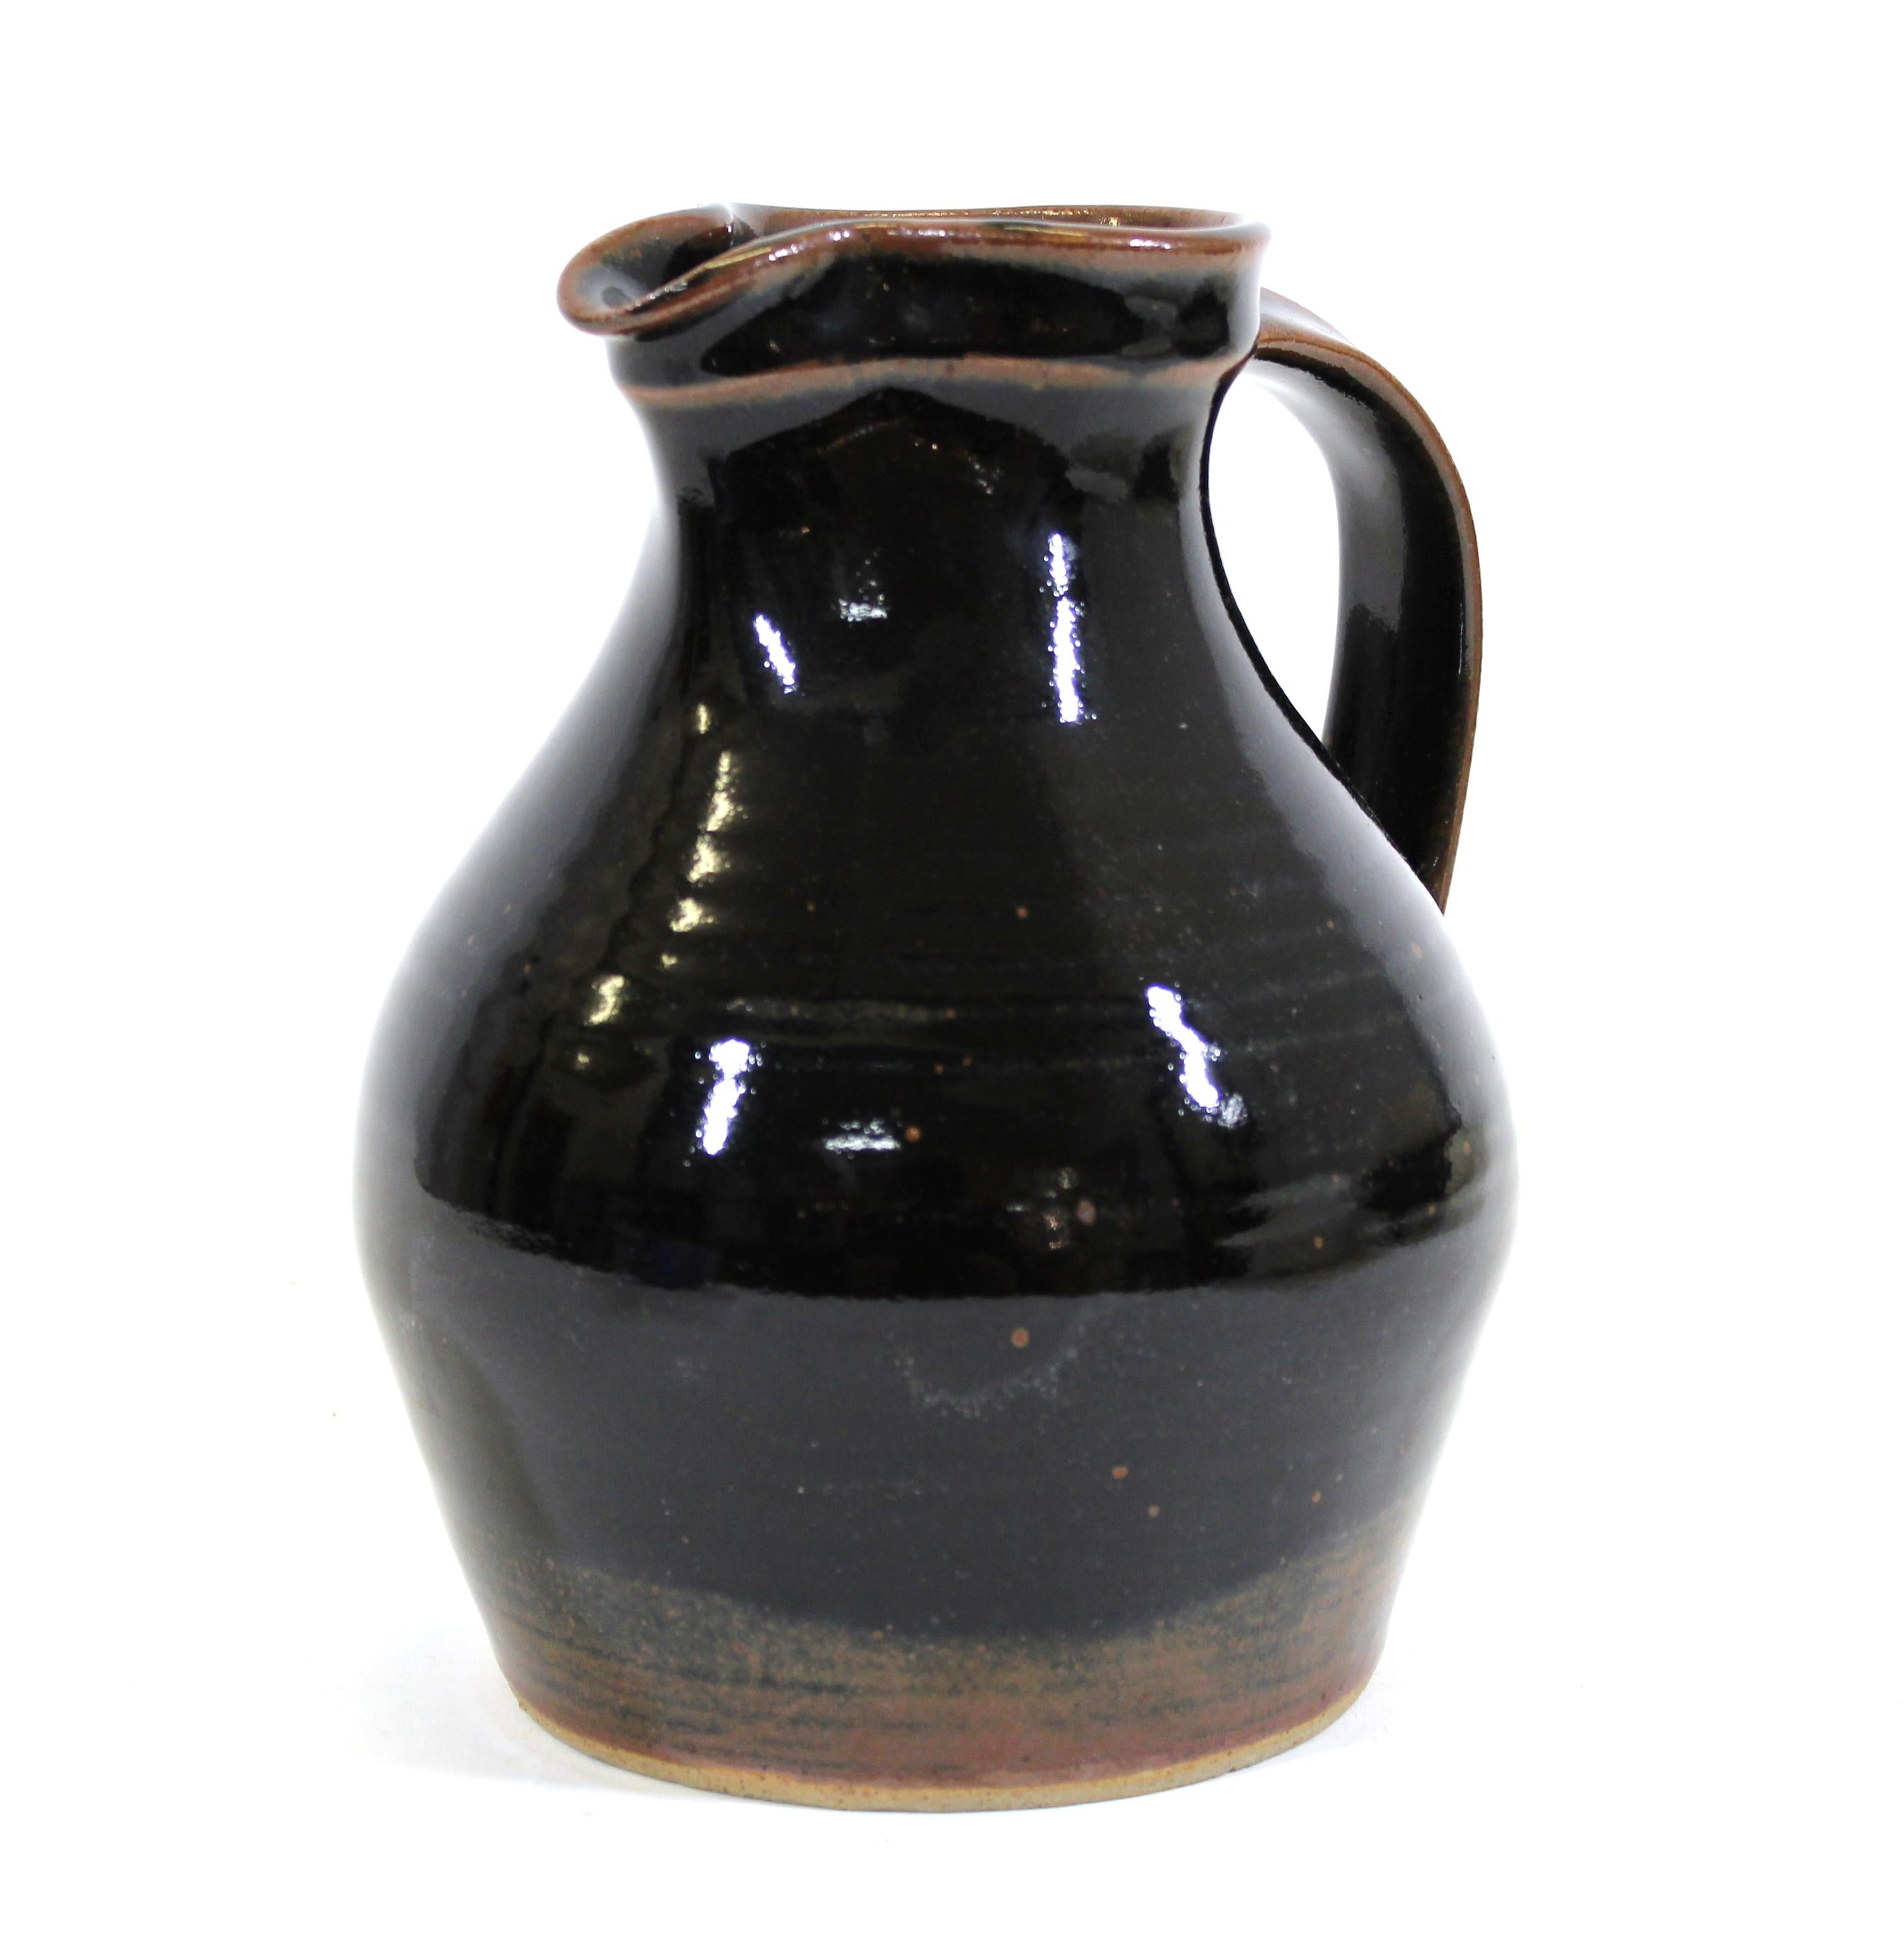 David Leach (English 1911-2005) for Lowerdown Pottery Mid-Century Modern Stoneware Jug, circa 1970. Stamped on the back below the handle.